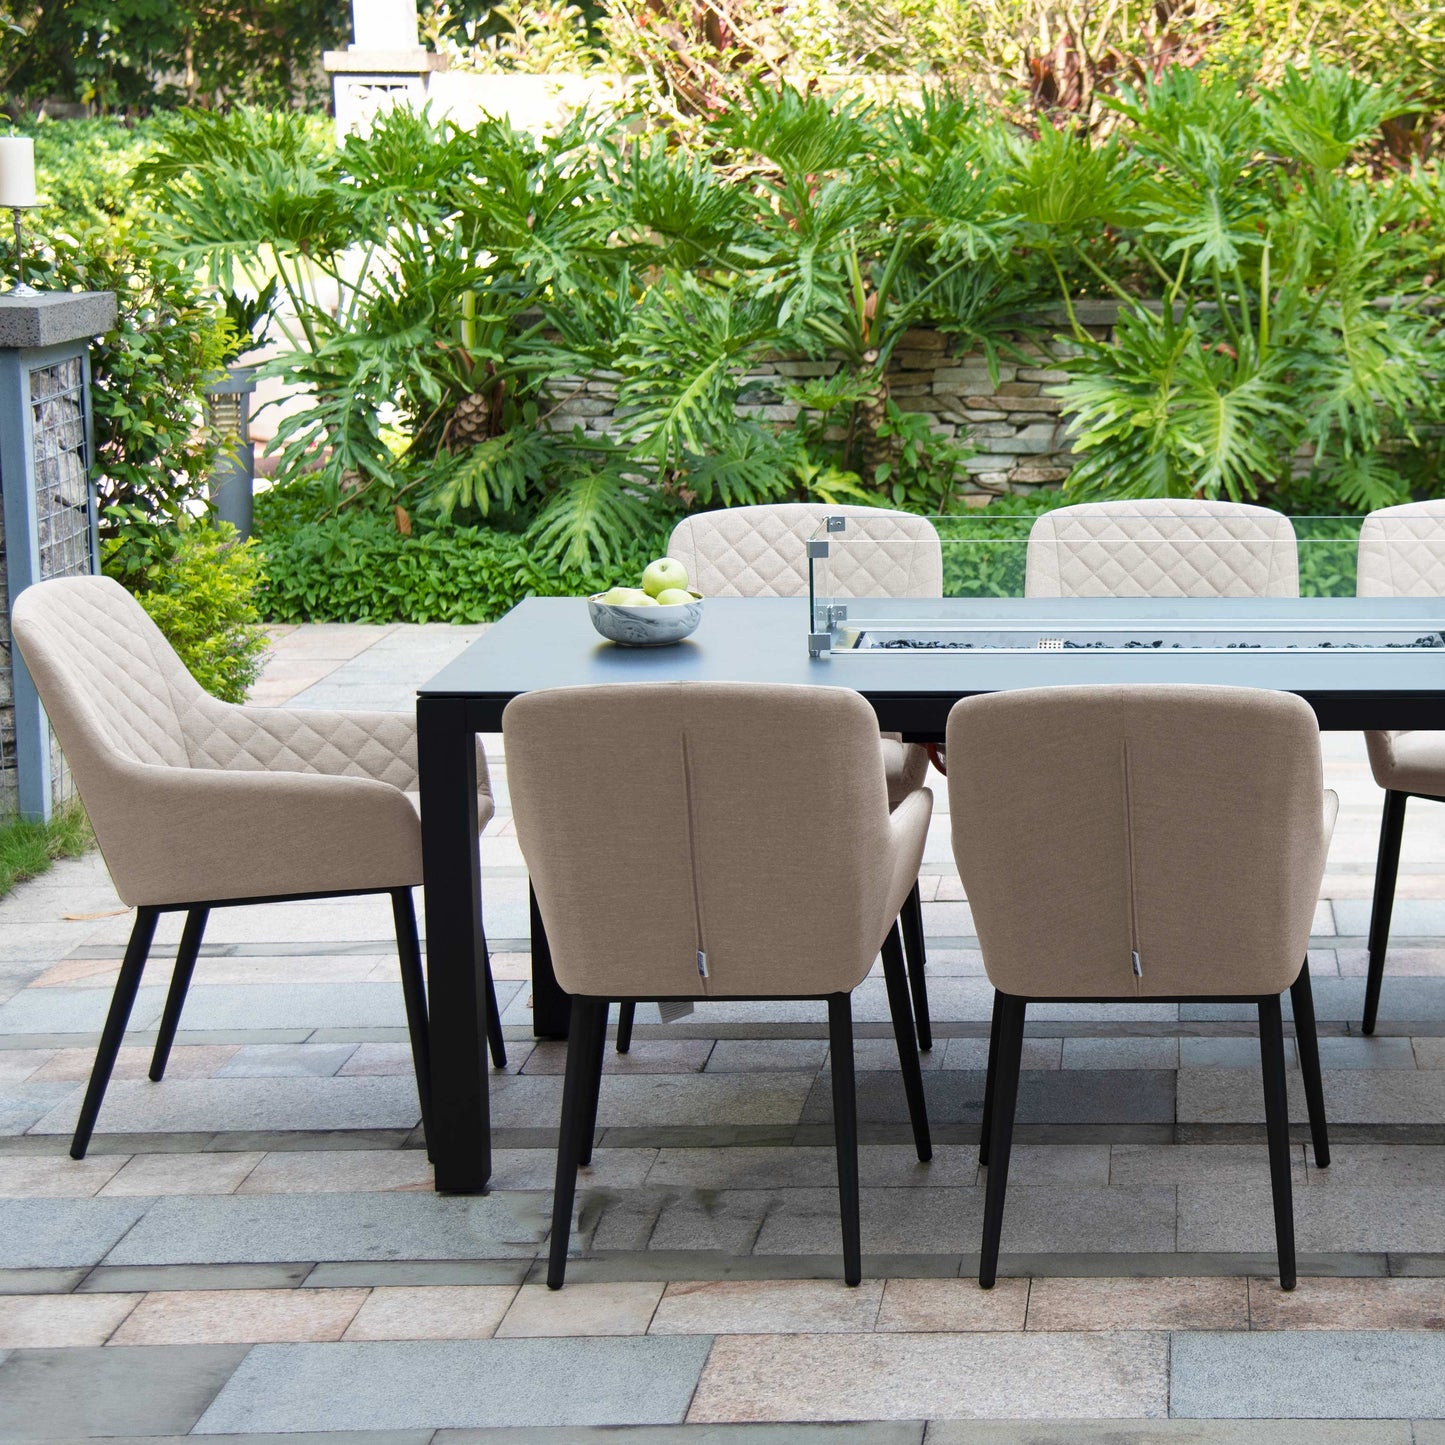 Outdoor Fabric Zest 8 Seat Rectangular Dining Set - With Fire Pit Table